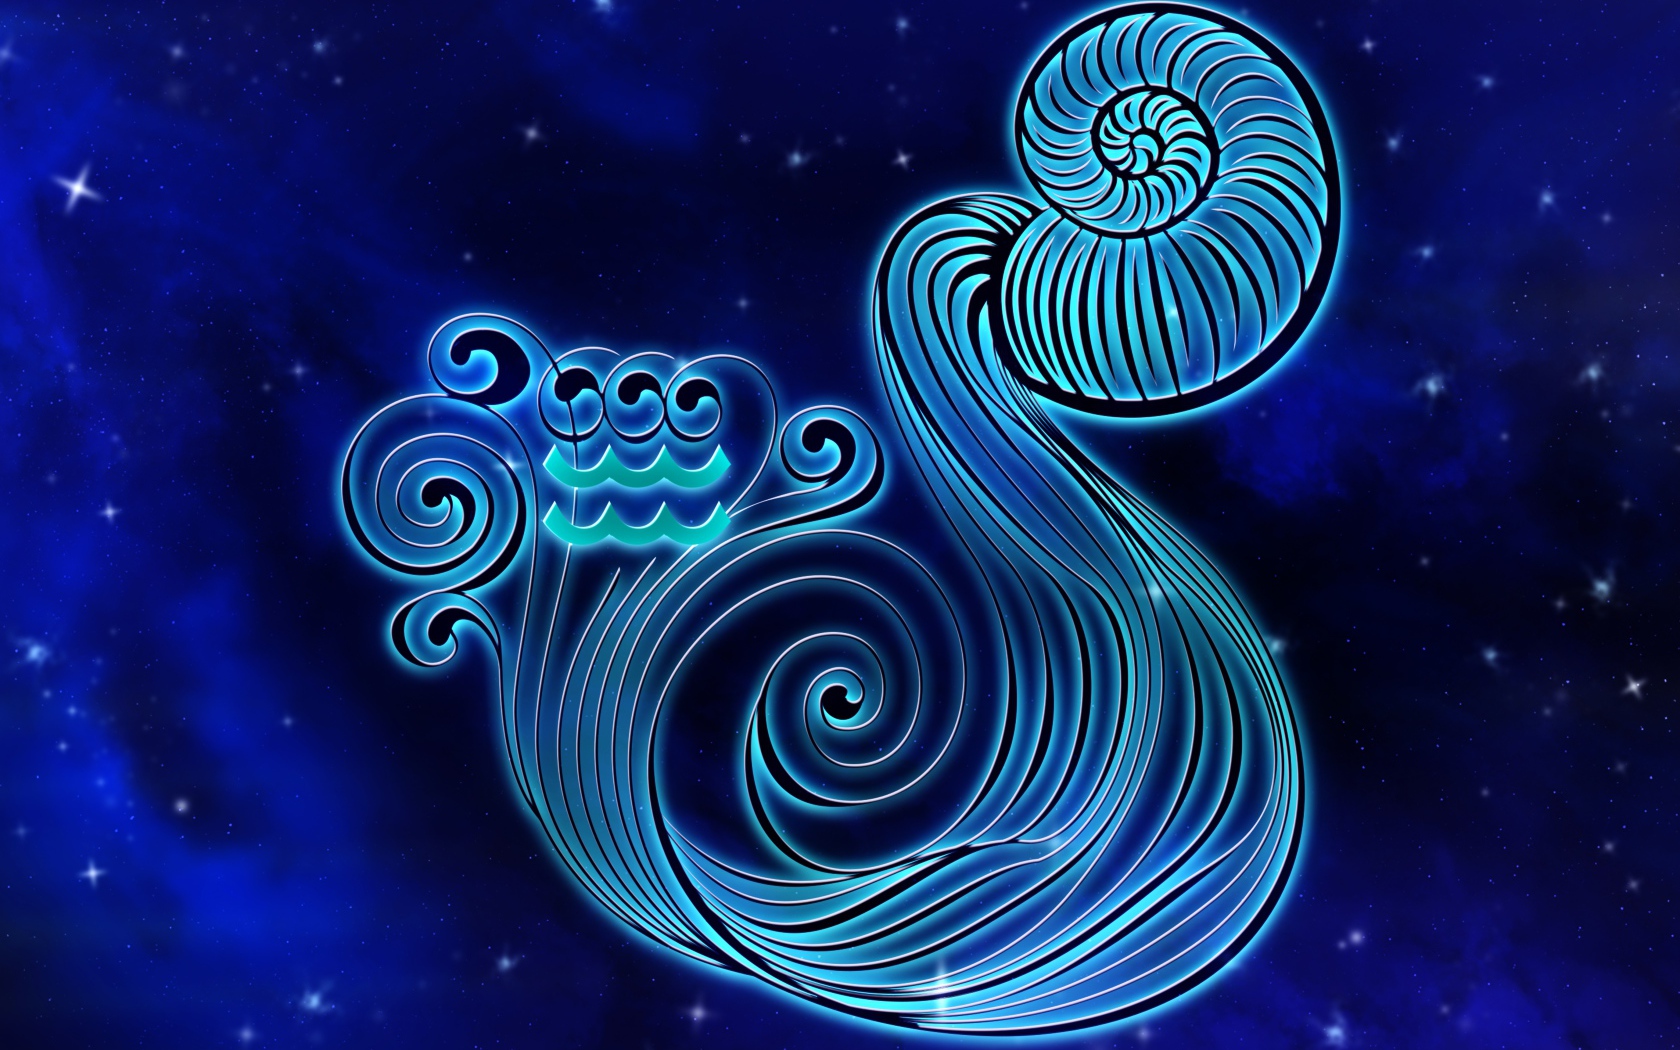 Beautiful sign Aquarius on a blue background